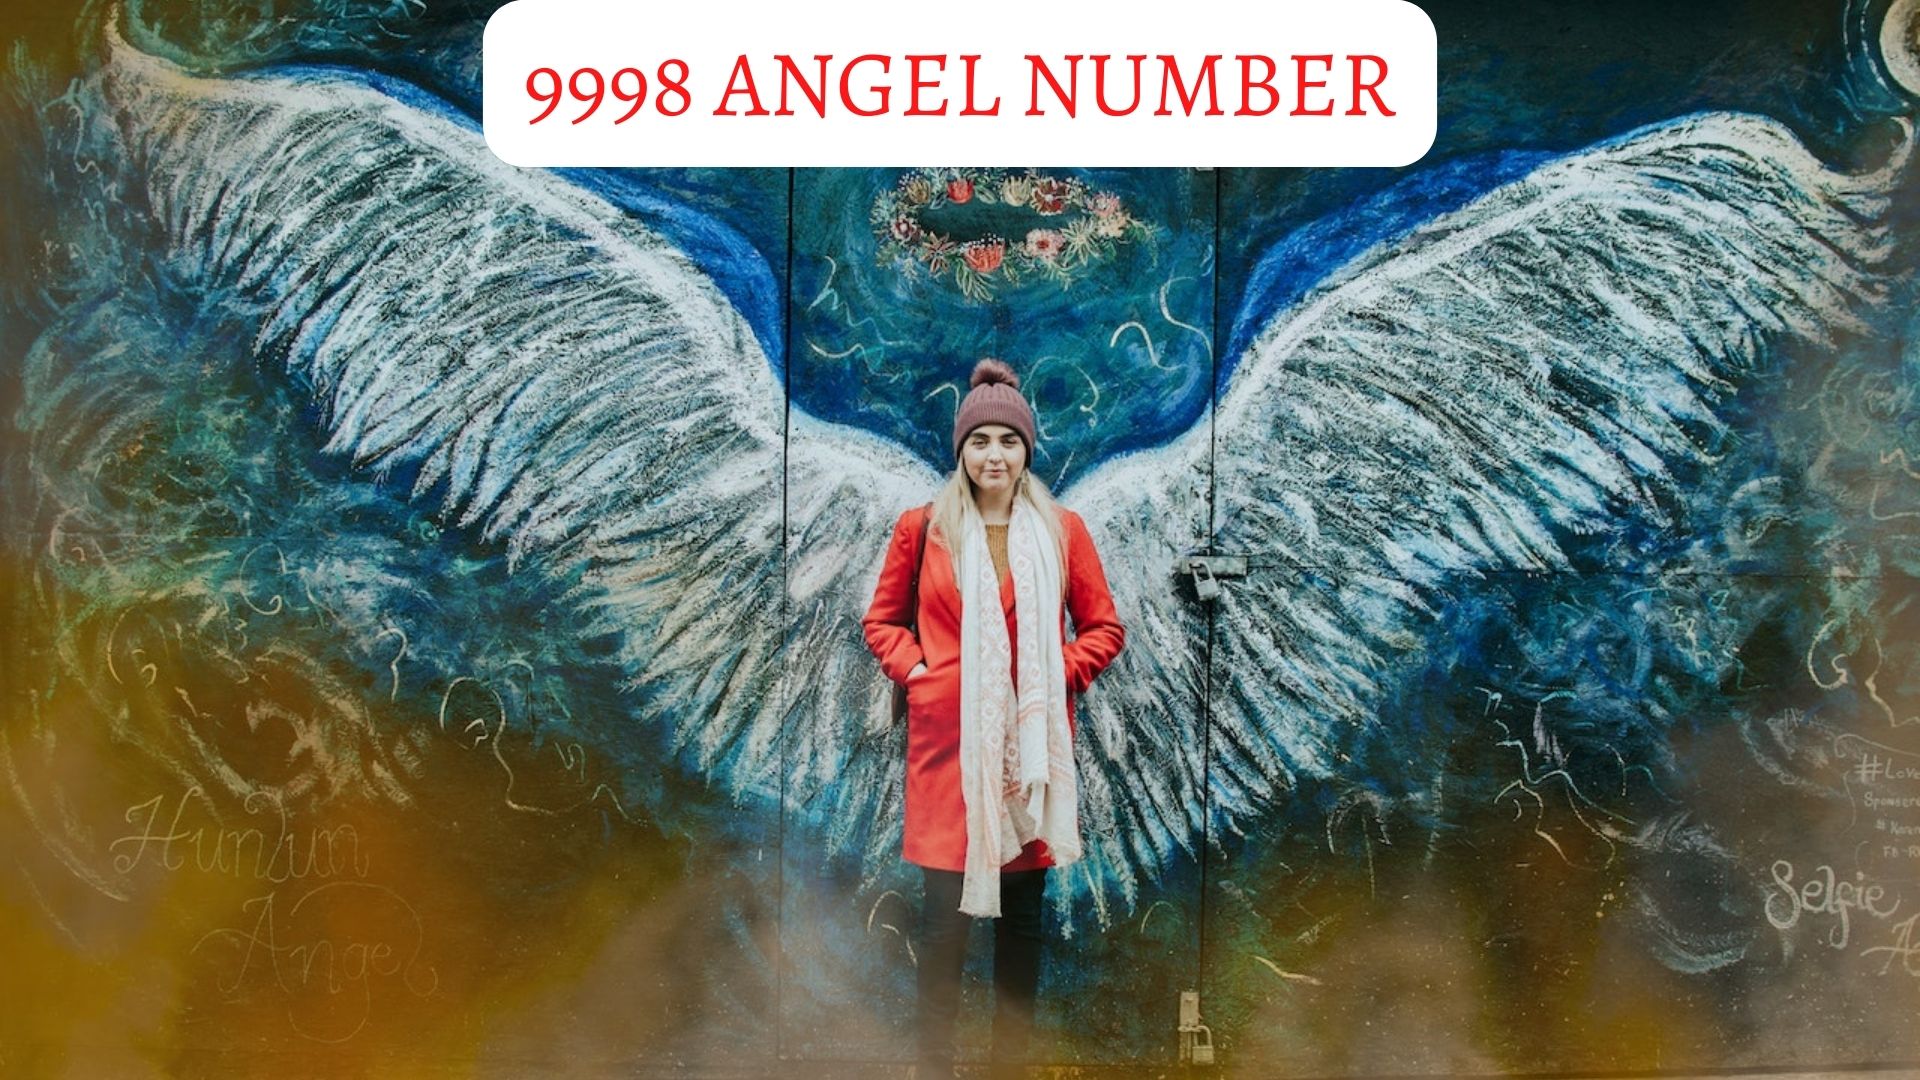 9998 Angel Number - Meaning, Symbolism, & Significance